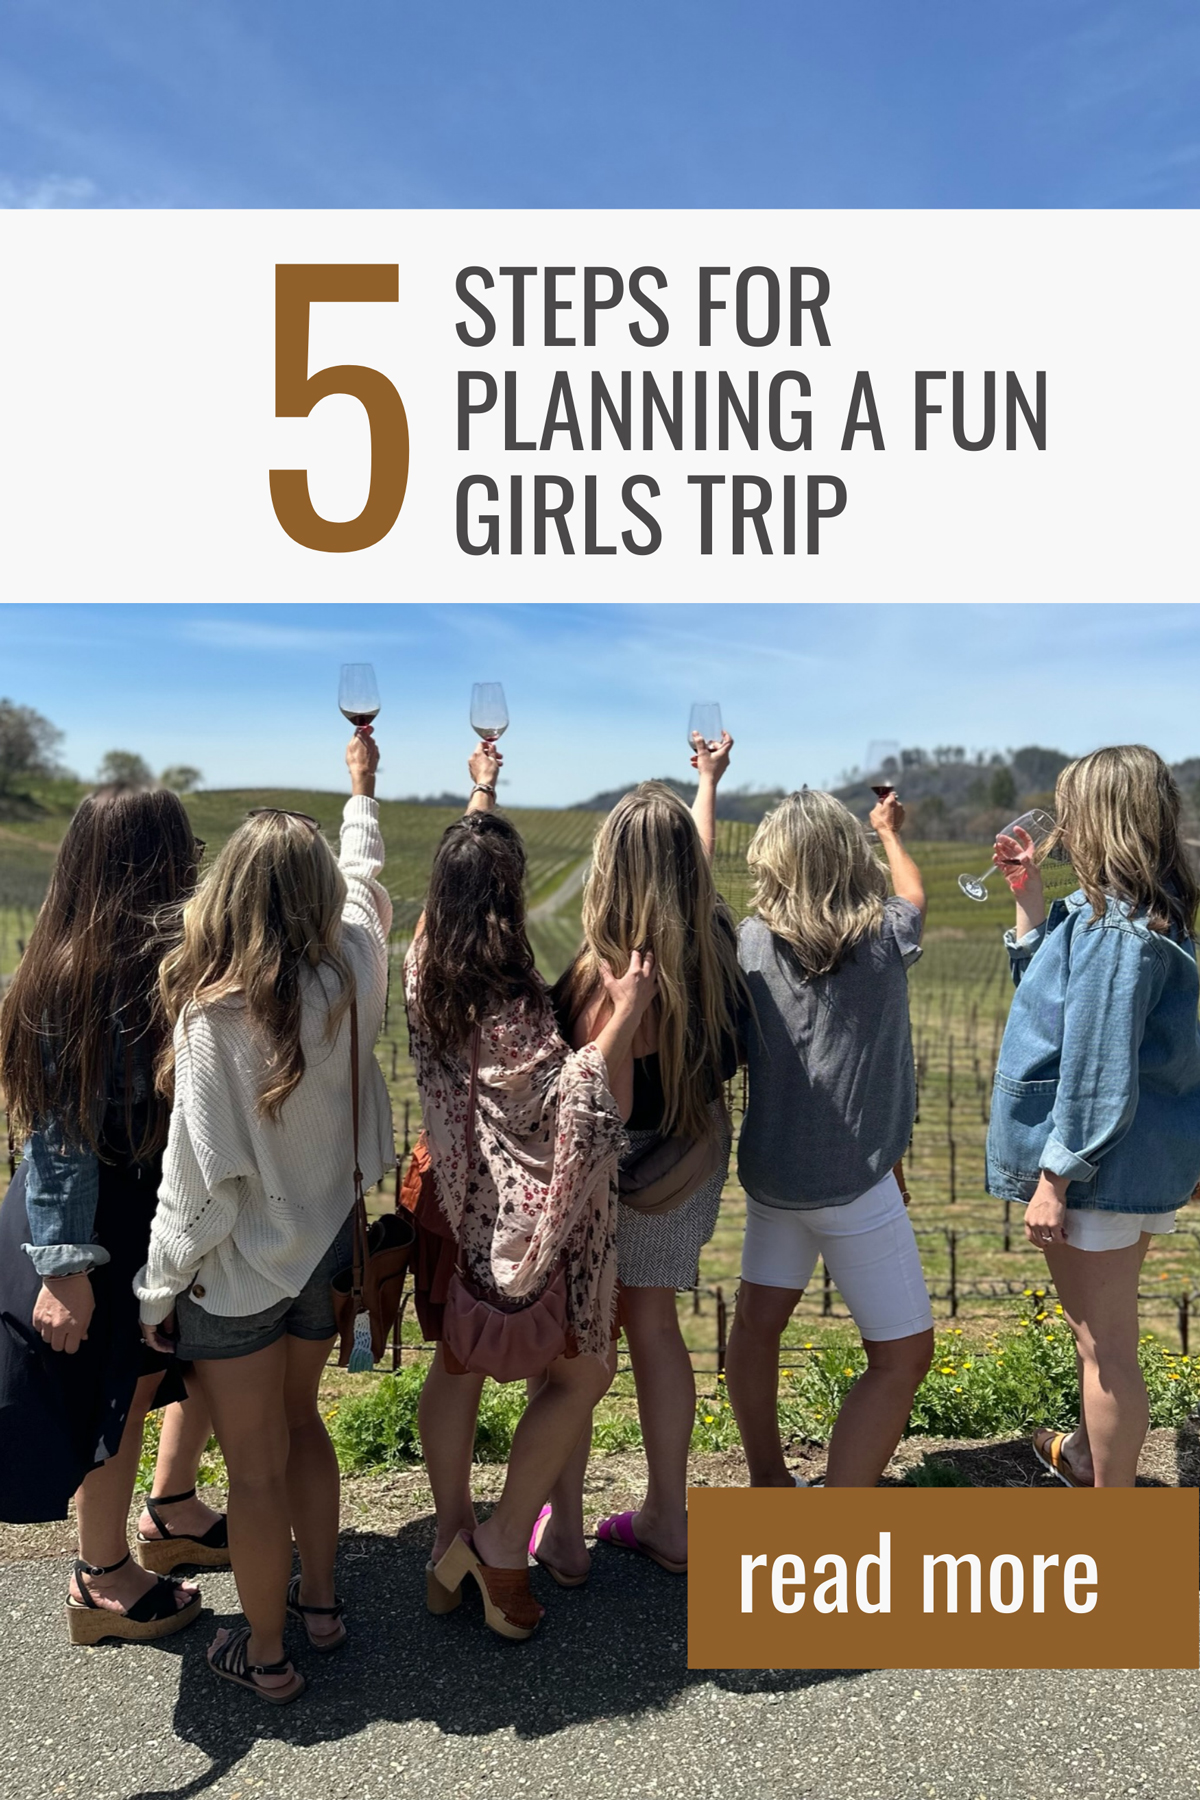 How to plans a girls trip